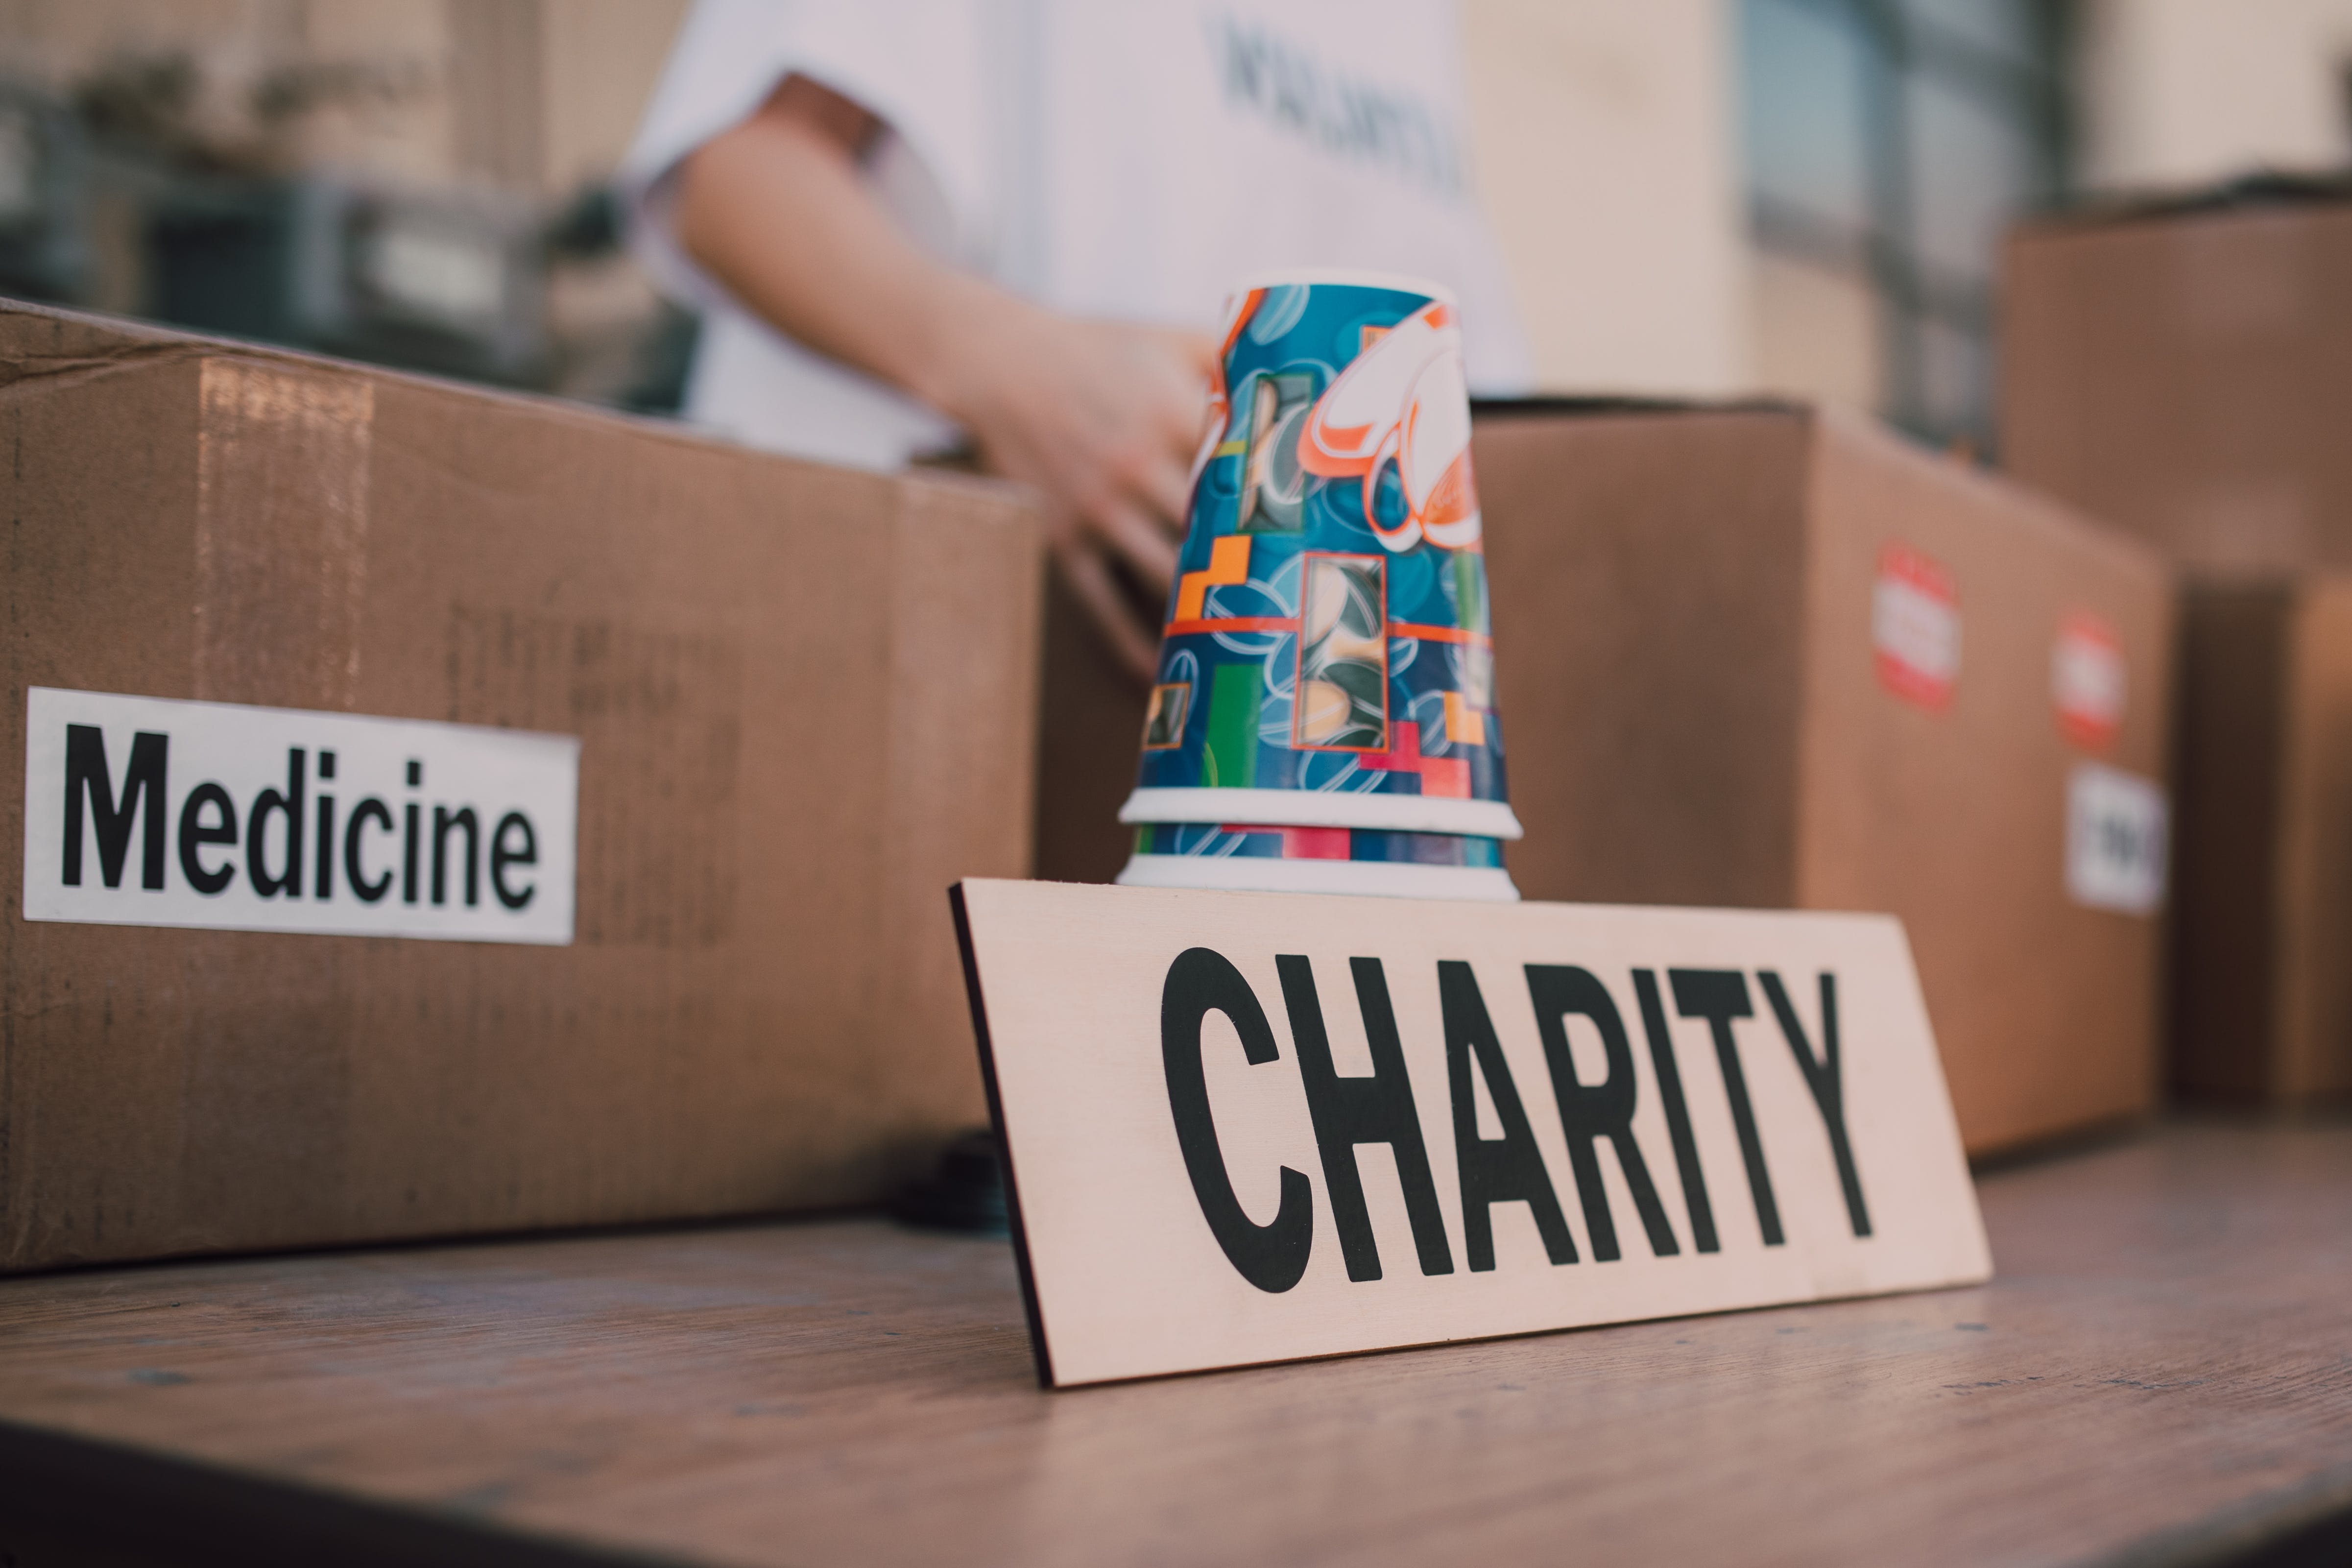 Strategies to help your favorite charity and your bottom line